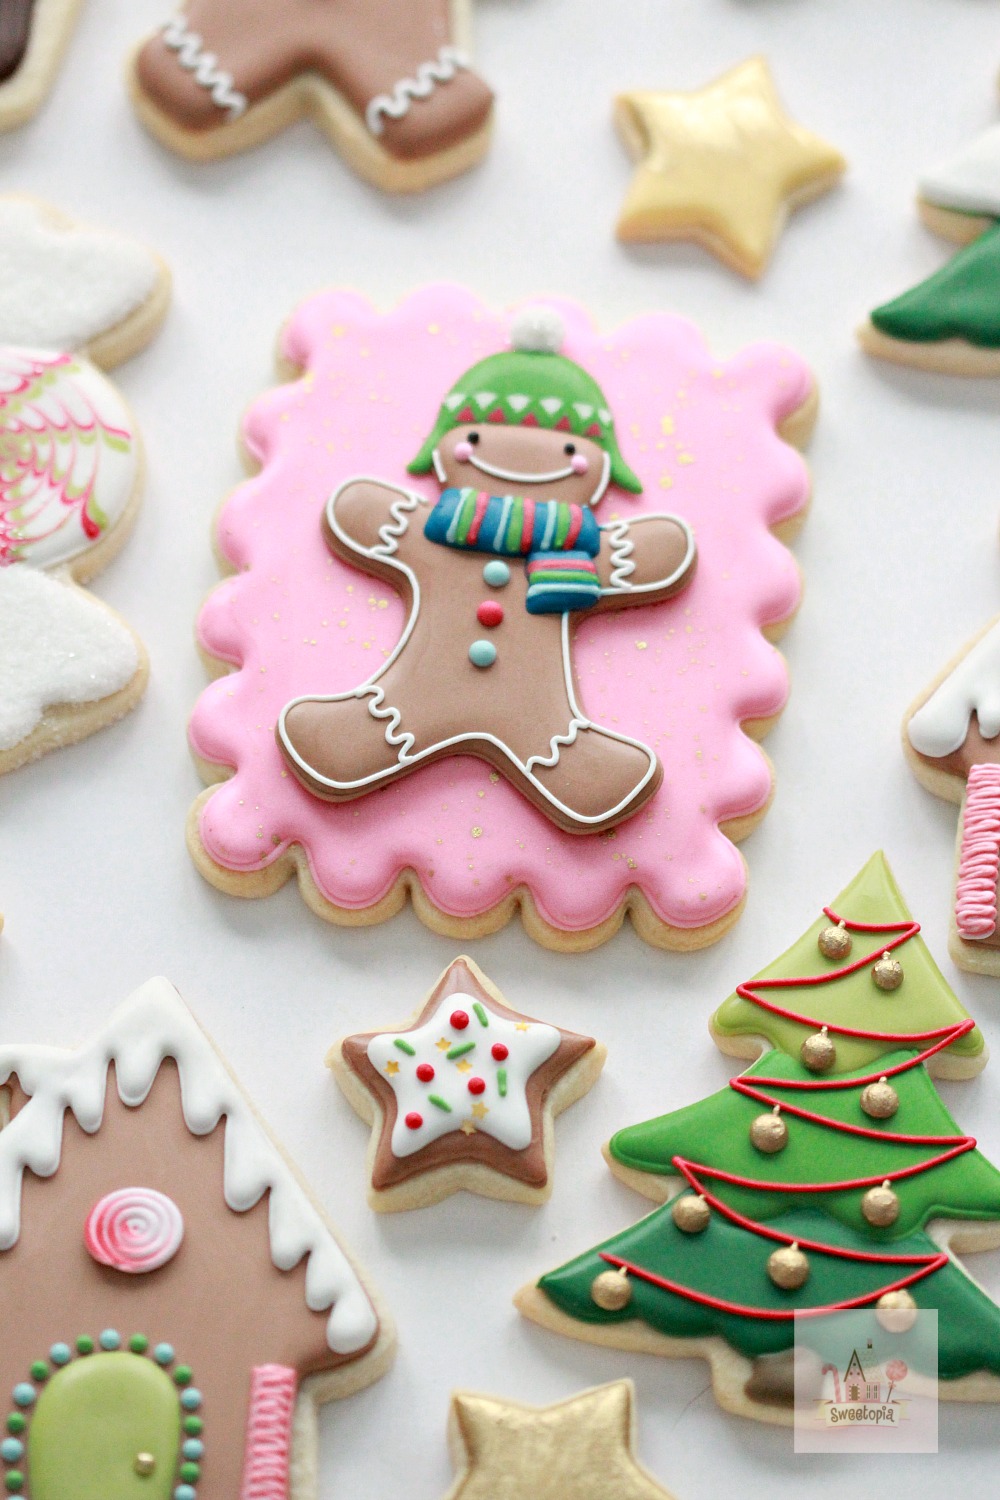 Royal Icing Christmas Cookie Ideas : Royal Icing Cookie Decorating Tips ...